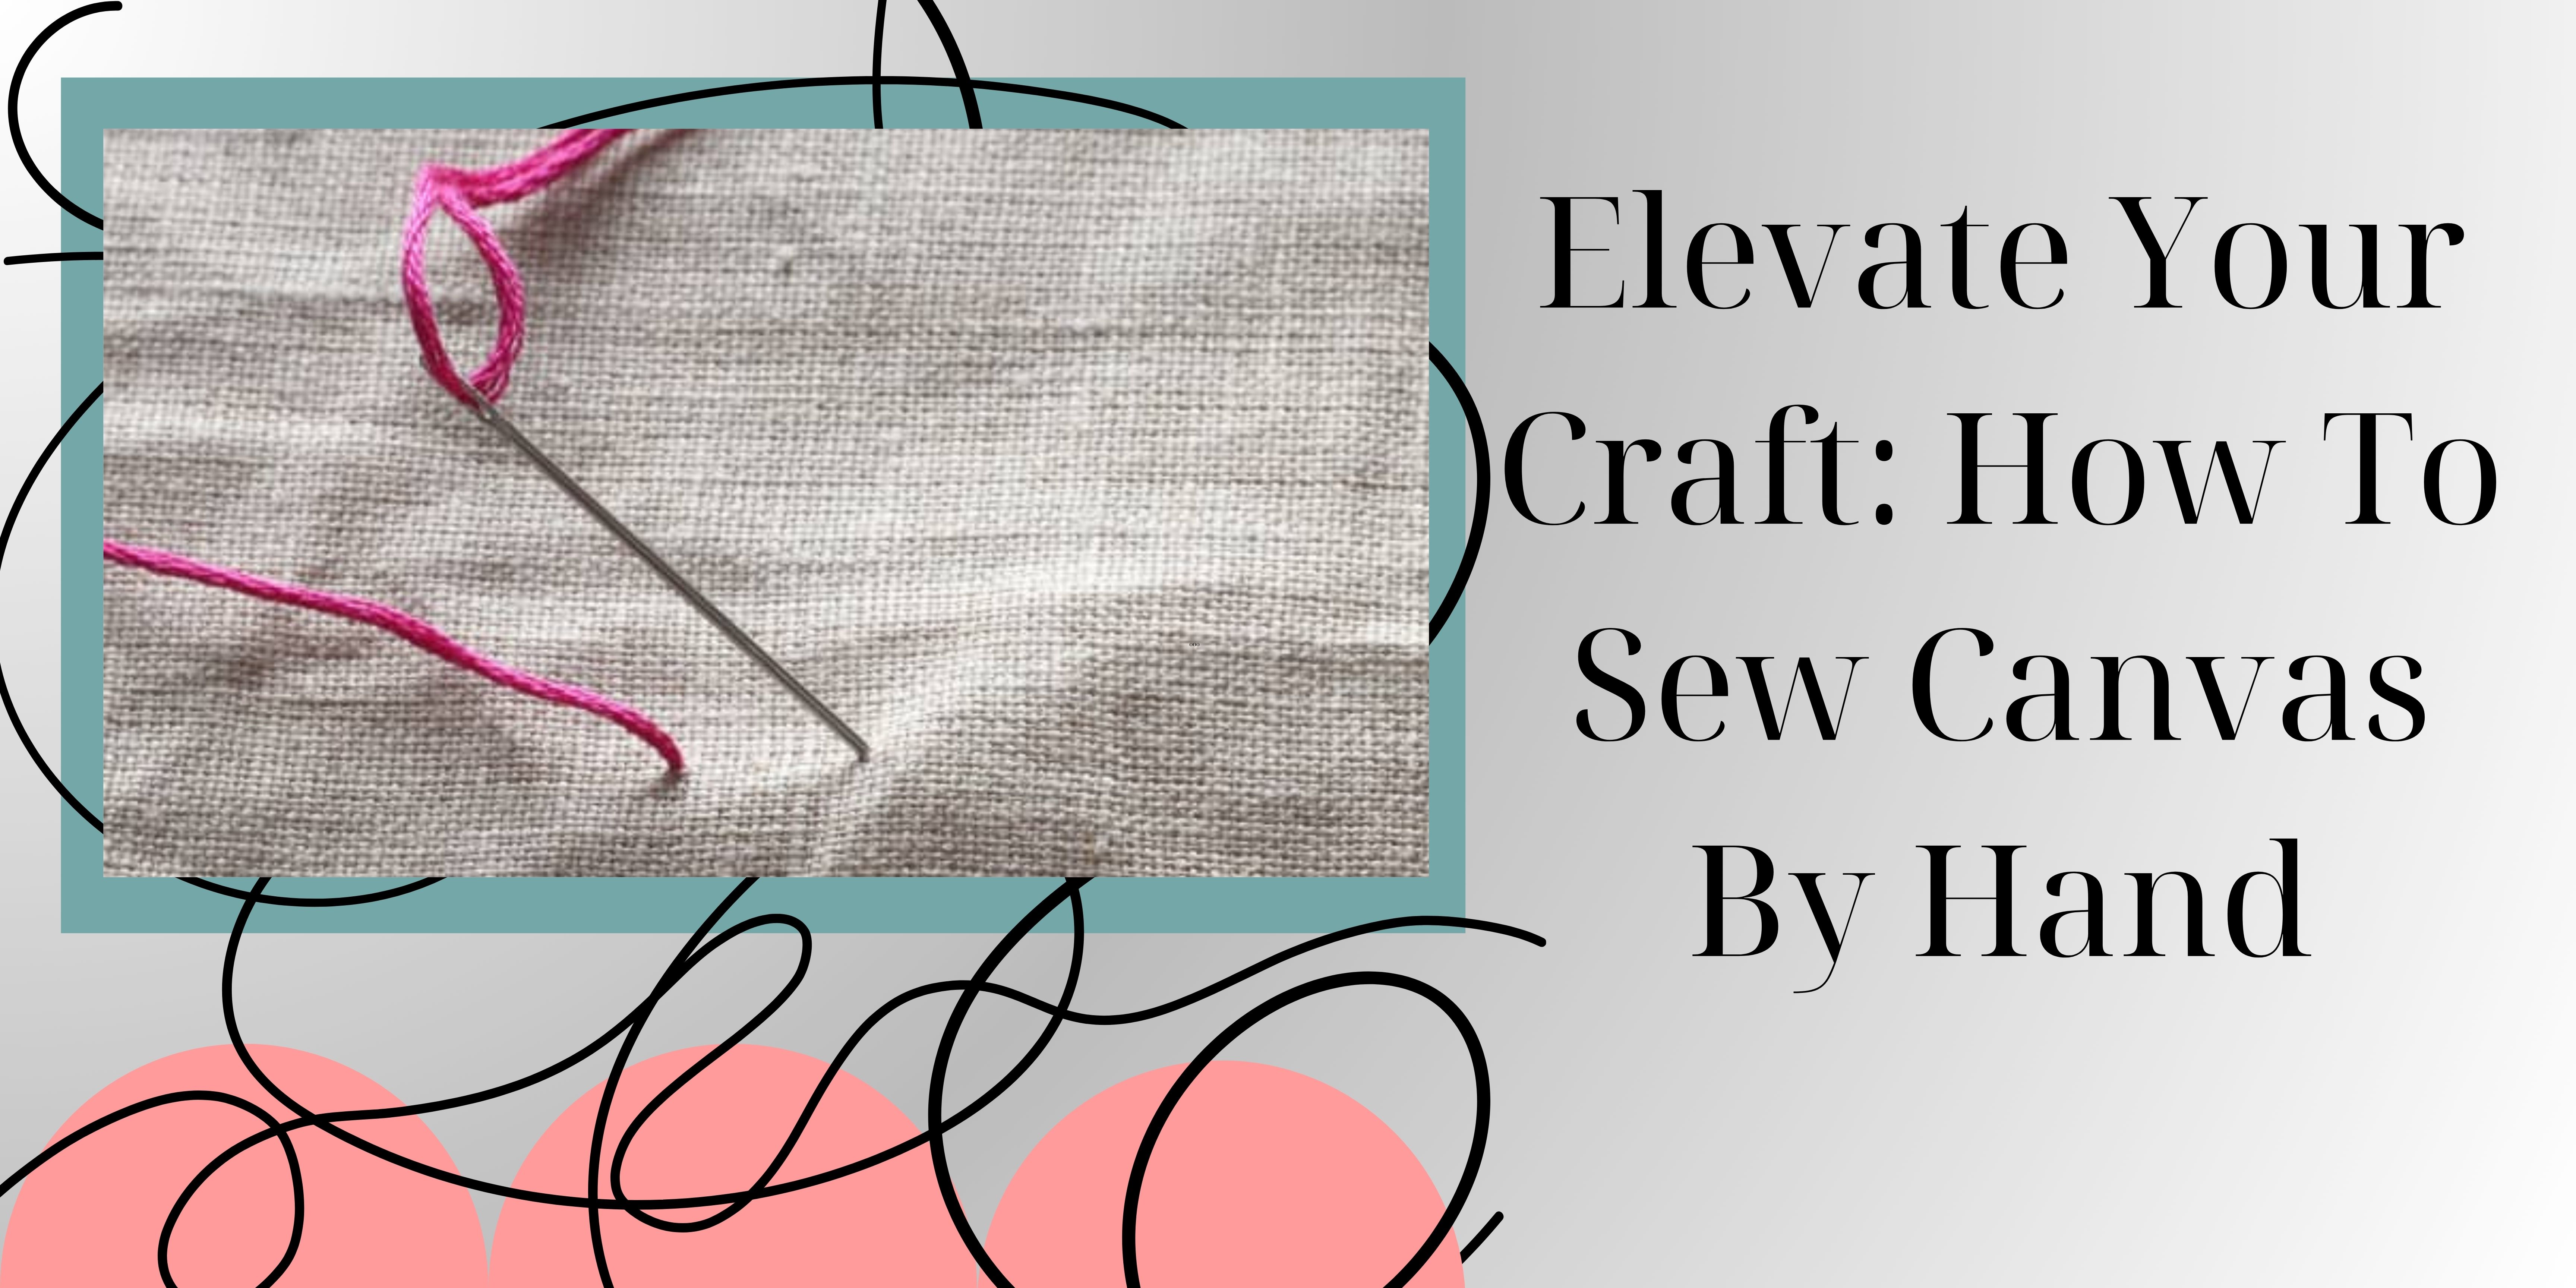 Elevate Your Craft: How To Sew Canvas By Hand